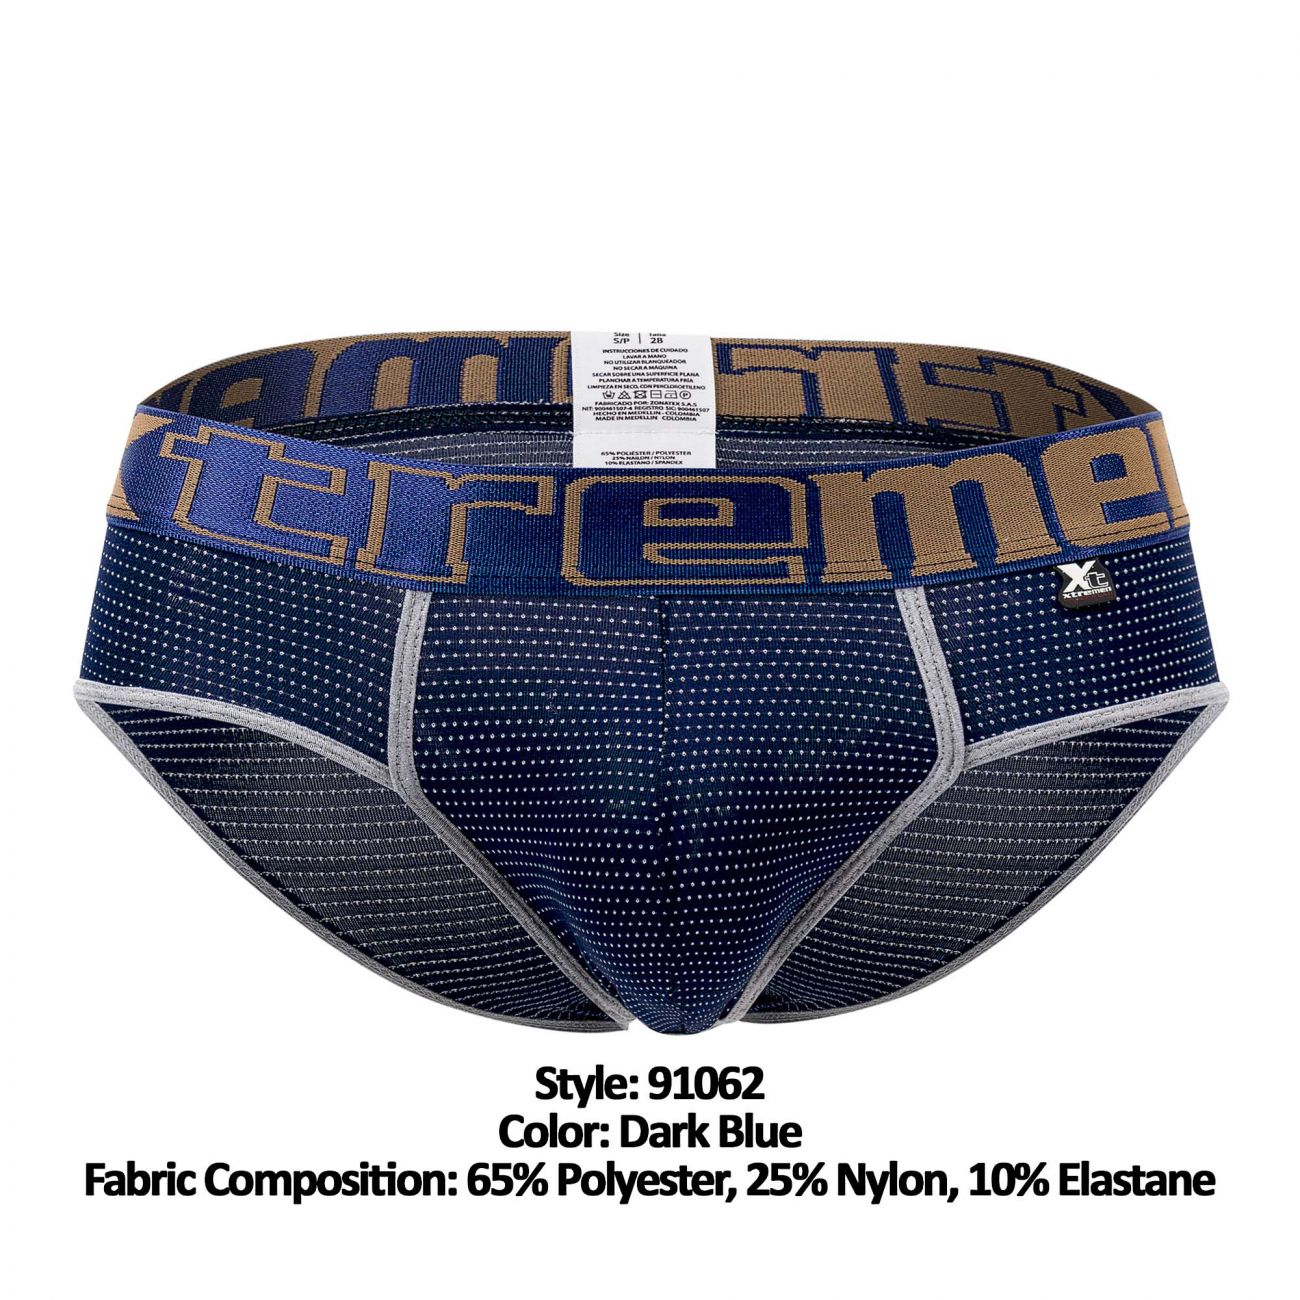 Xtremen Athletic Piping Briefs